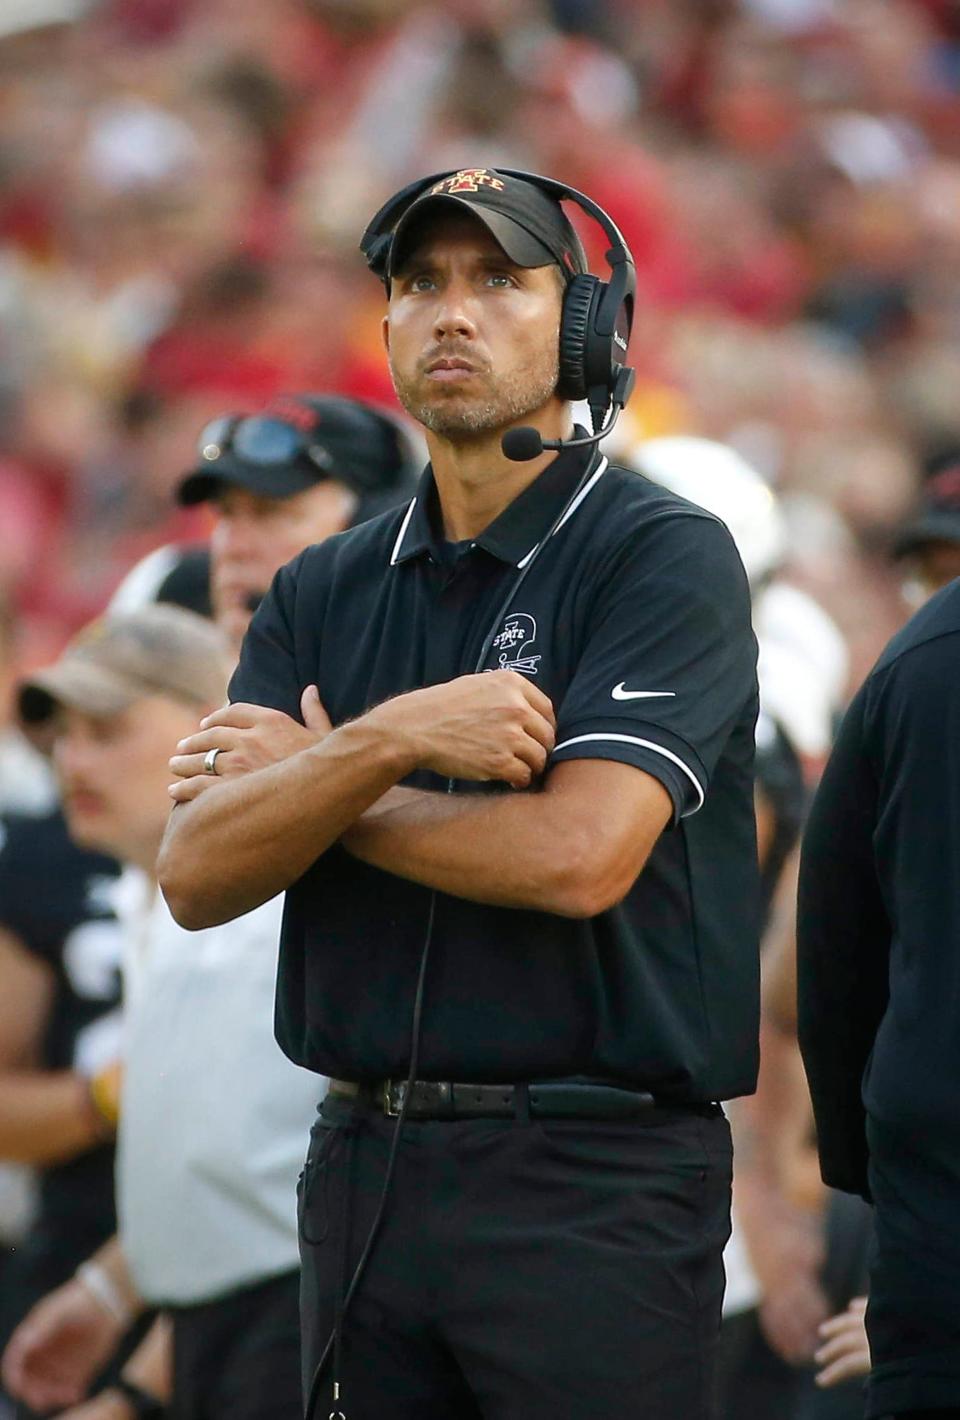 Matt Campbell's 2022 Iowa State football schedule will be full of intrigue, after losing many top players.